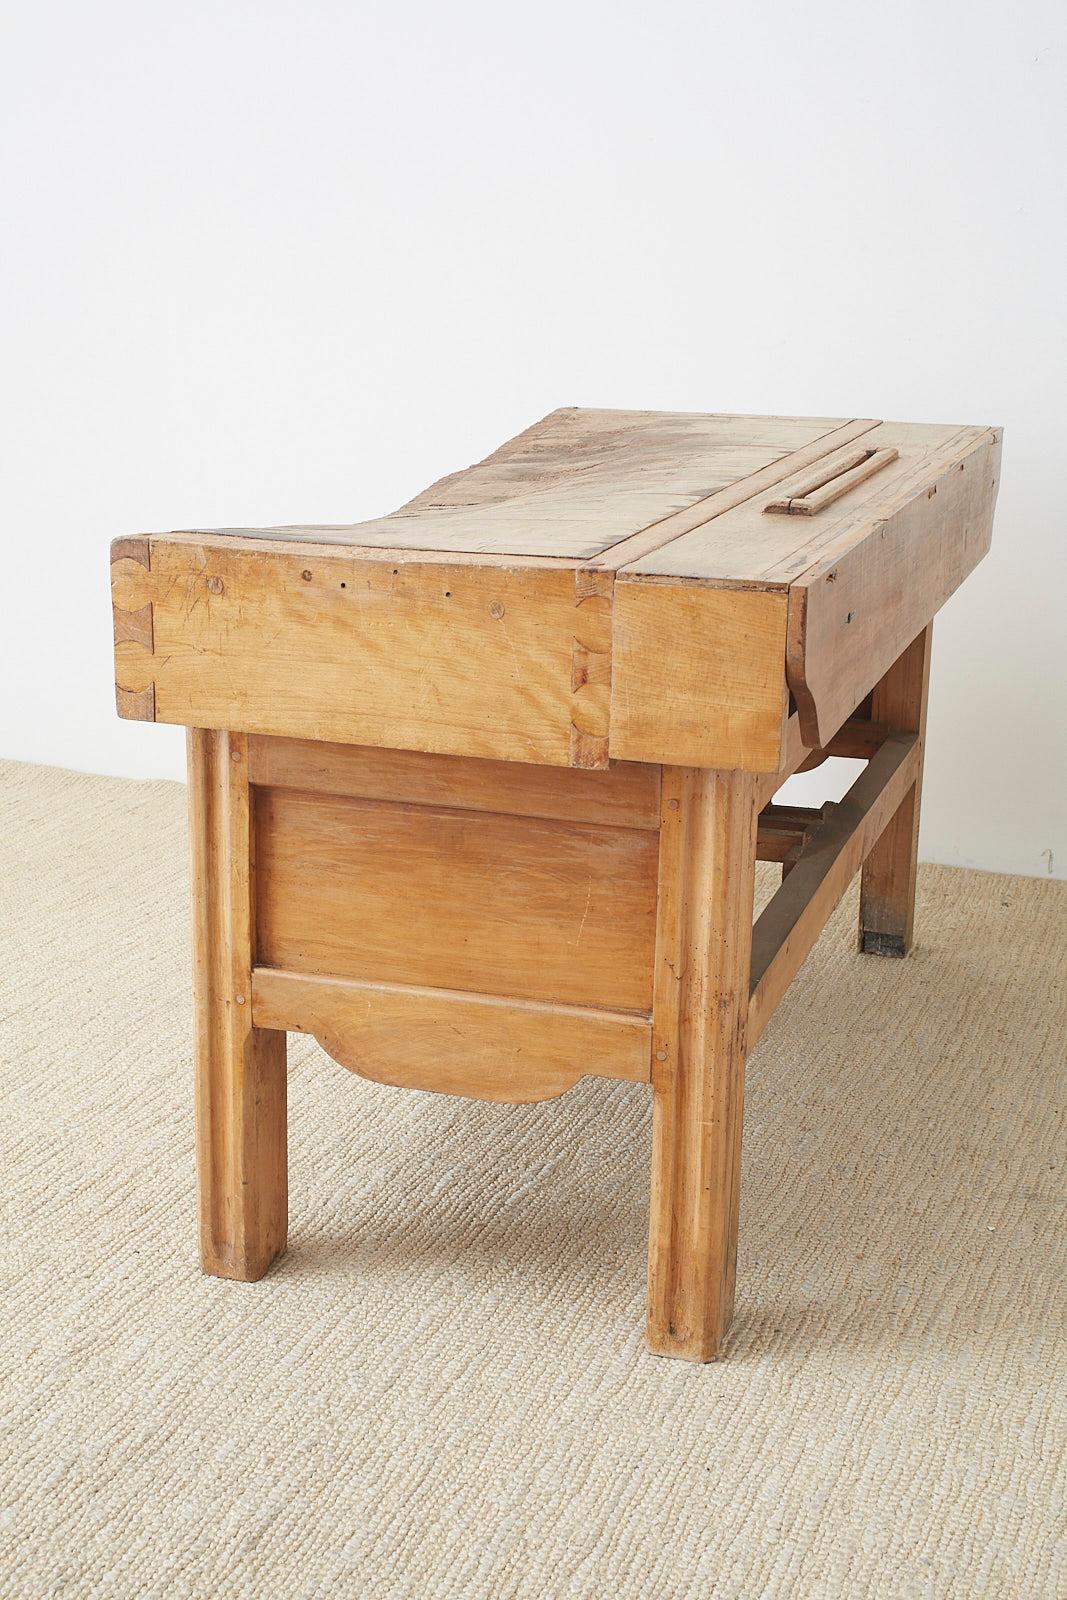 Hand-Carved 19th Century French Butcher Block Work Table